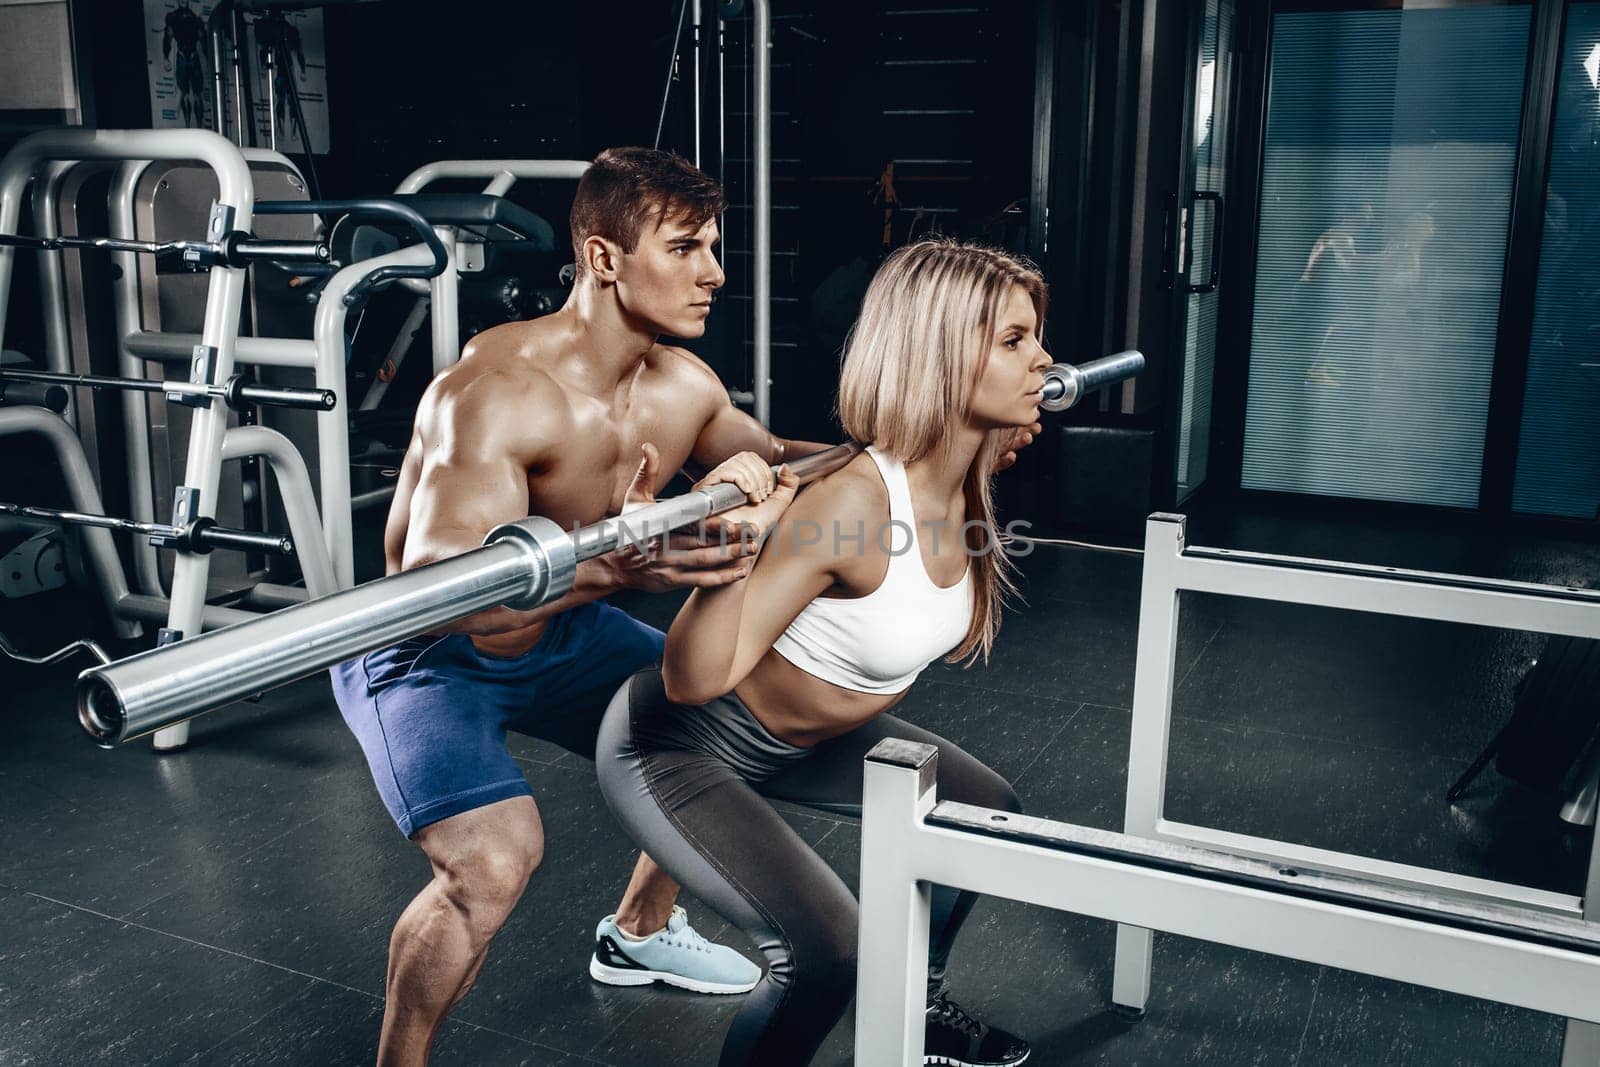 Personal trainer helping a young woman lift a barbell while working out in a gym by nazarovsergey